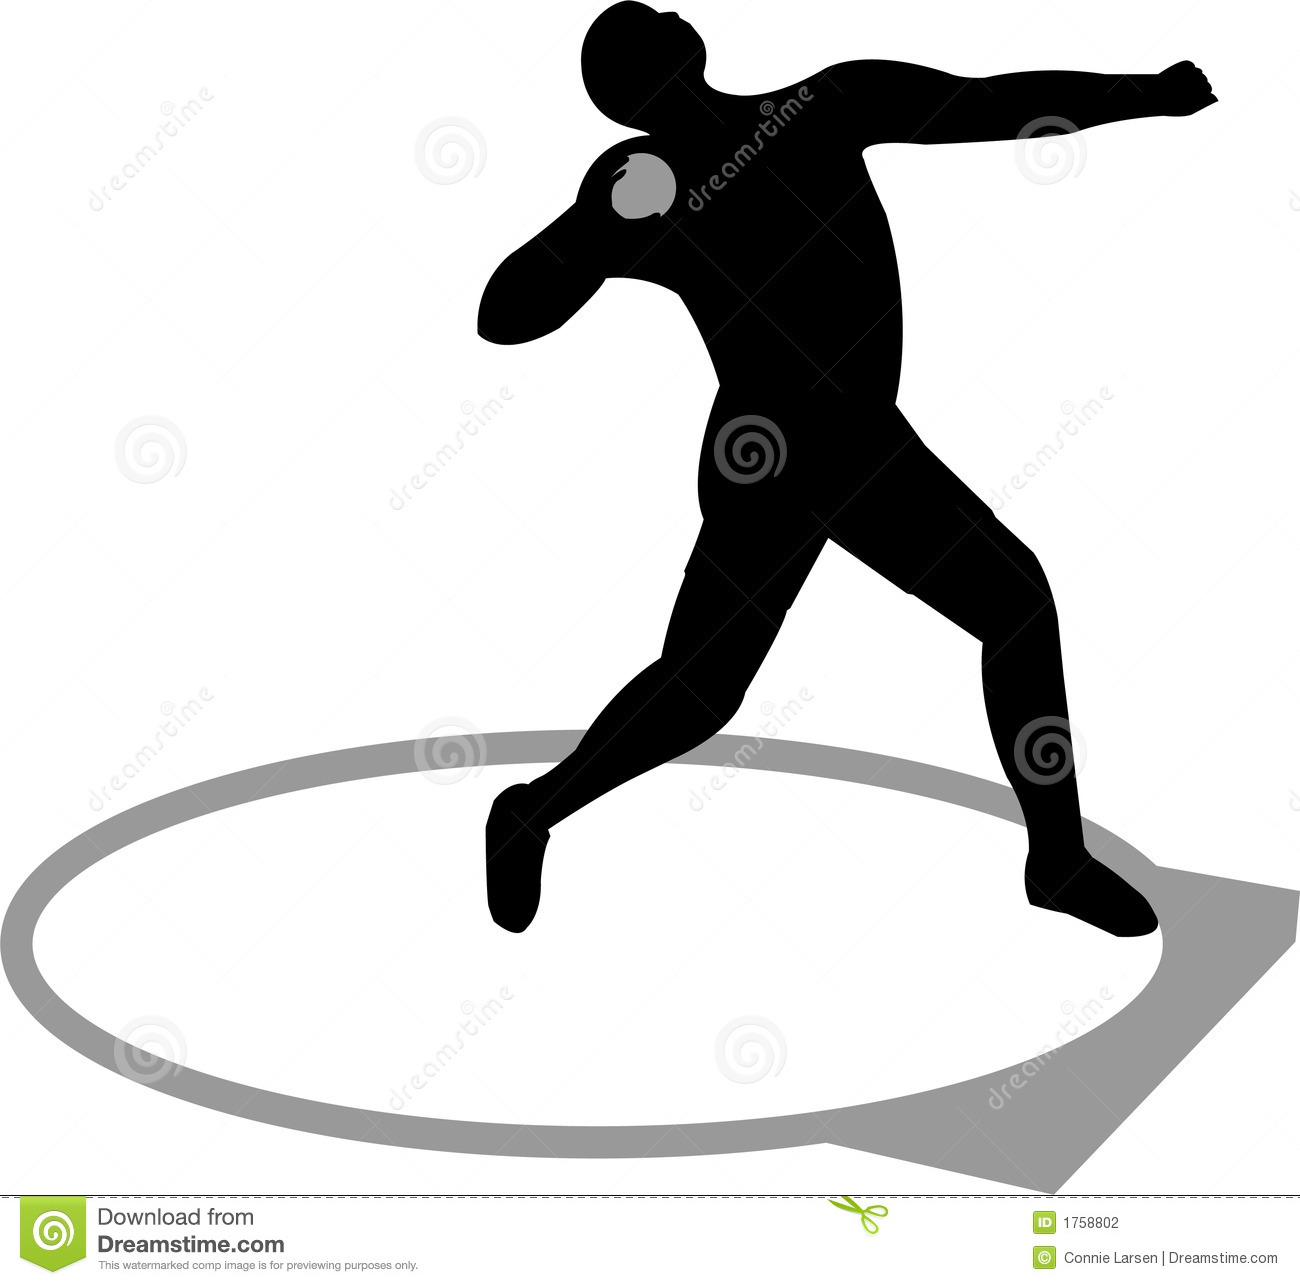 Illustration Of A Track And Field Athlete Competing In Shot Put